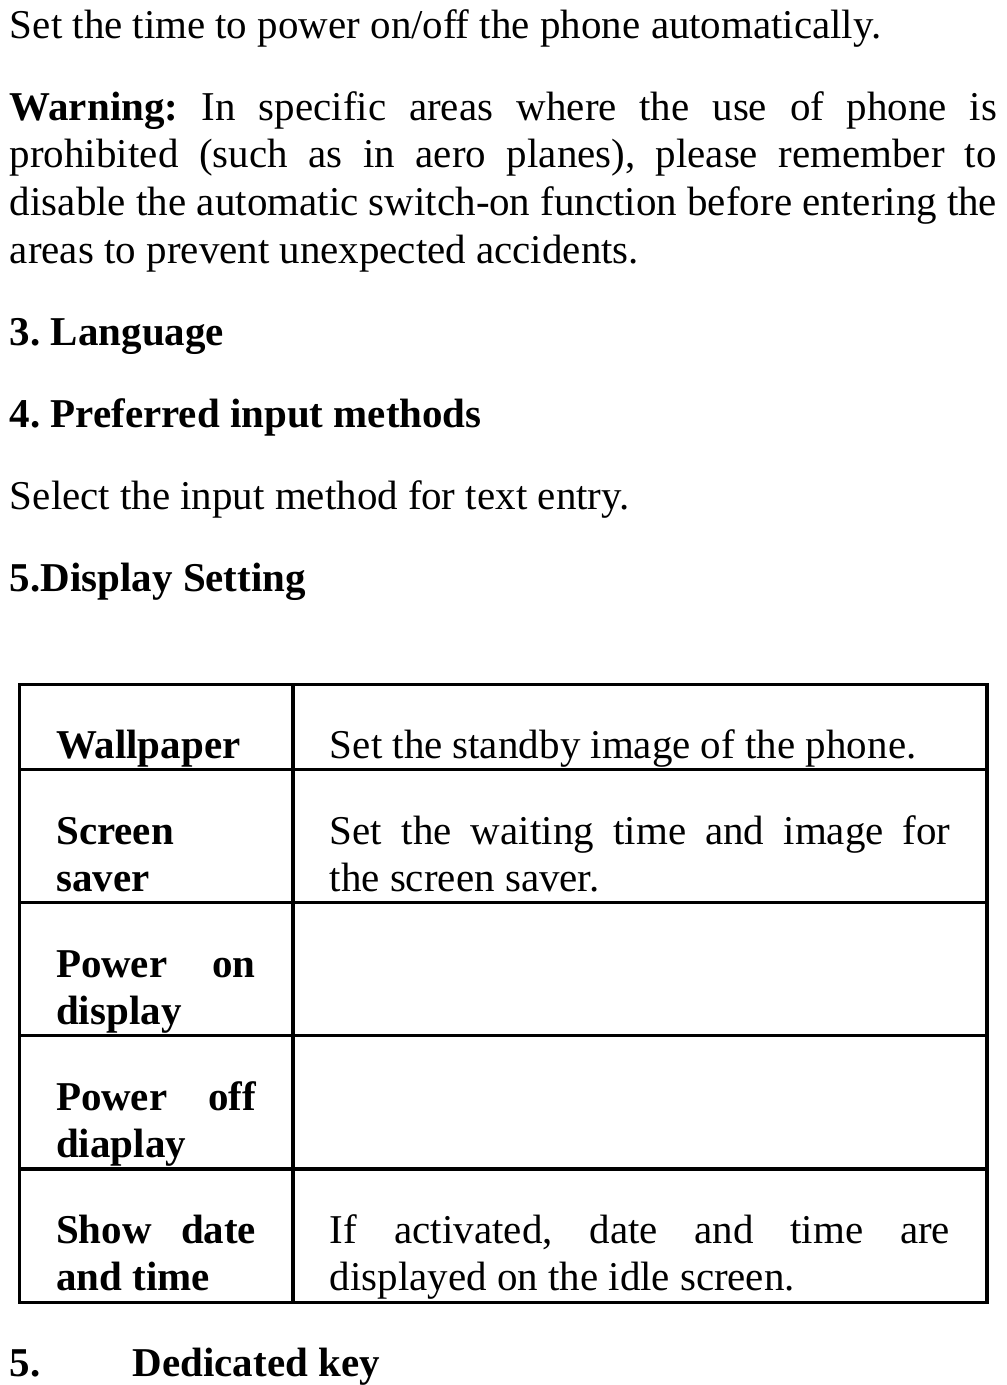  Set the time to power on/off the phone automatically. Warning: In specific areas where the use of phone is prohibited (such as in aero planes), please remember to disable the automatic switch-on function before entering the areas to prevent unexpected accidents. 3. Language 4. Preferred input methods Select the input method for text entry. 5.Display Setting  Wallpaper  Set the standby image of the phone. Screen saver  Set the waiting time and image for the screen saver. Power on display   Power off diaplay   Show date and time  If activated, date and time are displayed on the idle screen. 5. Dedicated key 